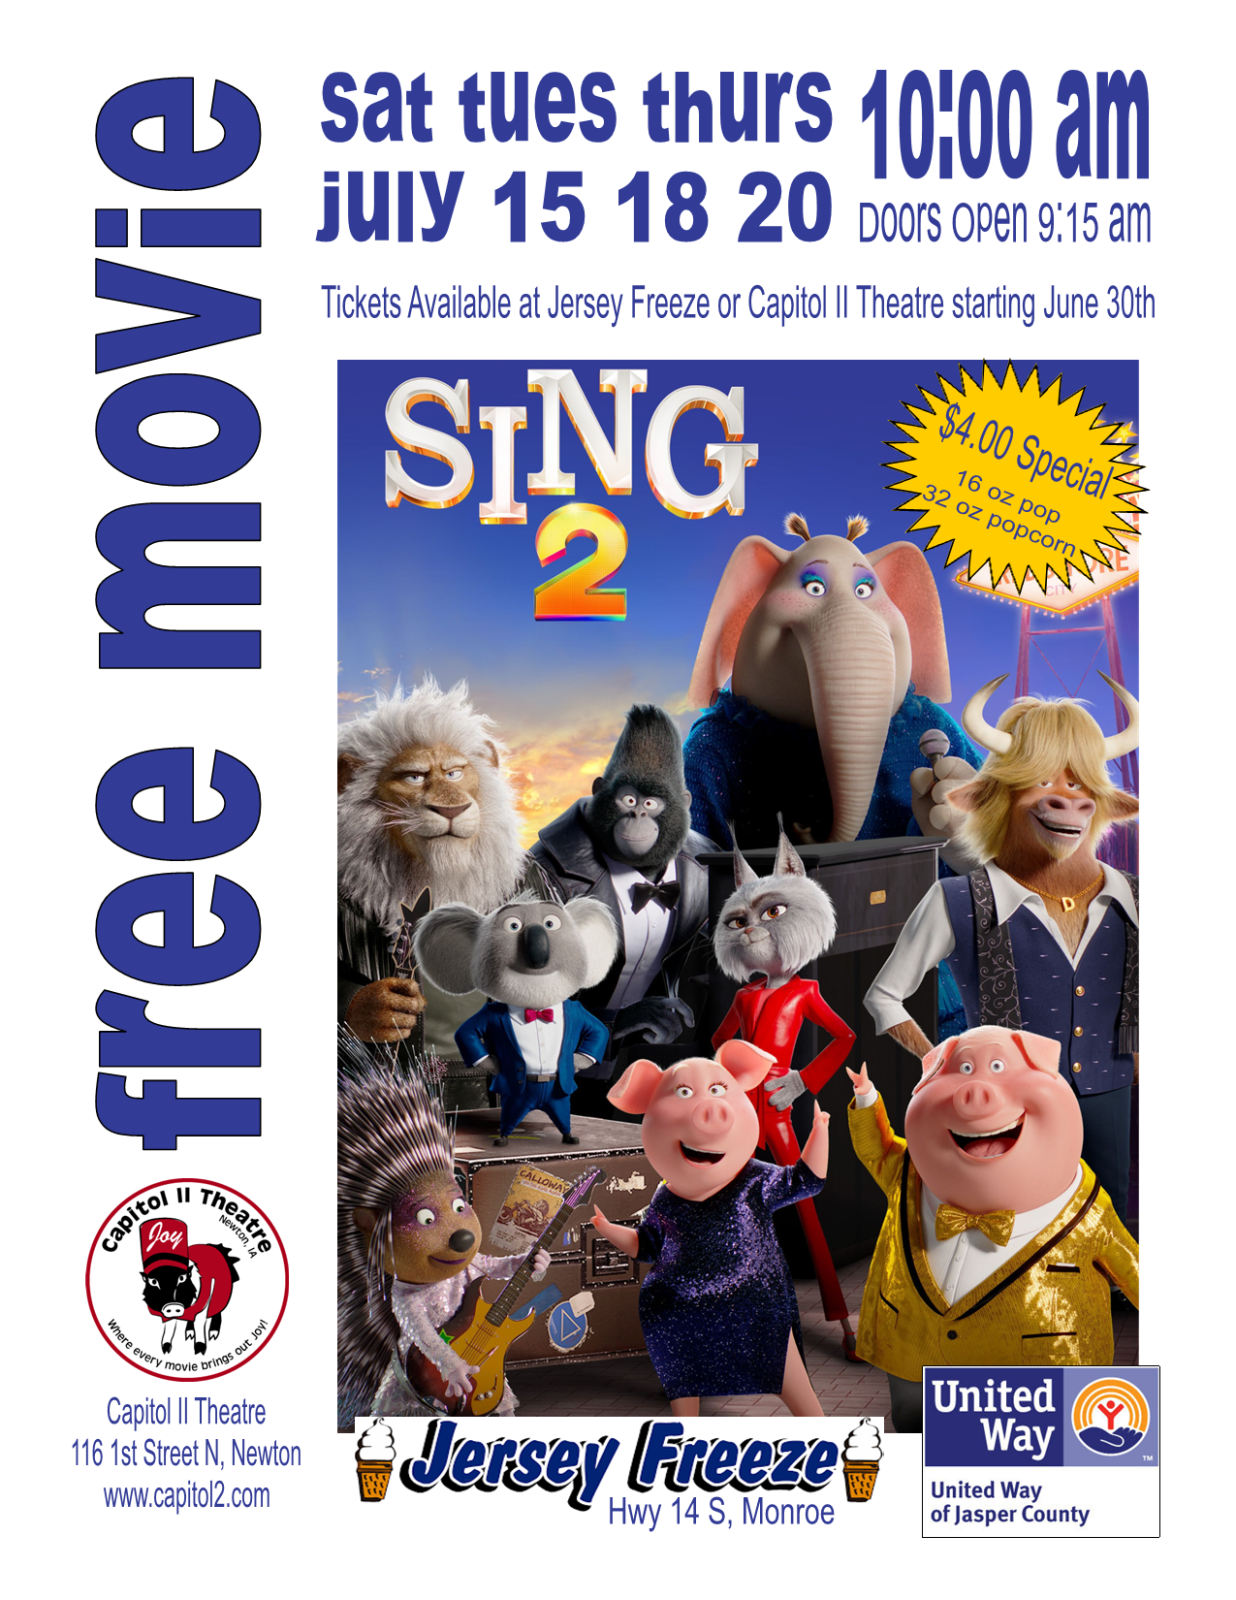 Event Promo Photo For Free Movie: Sing